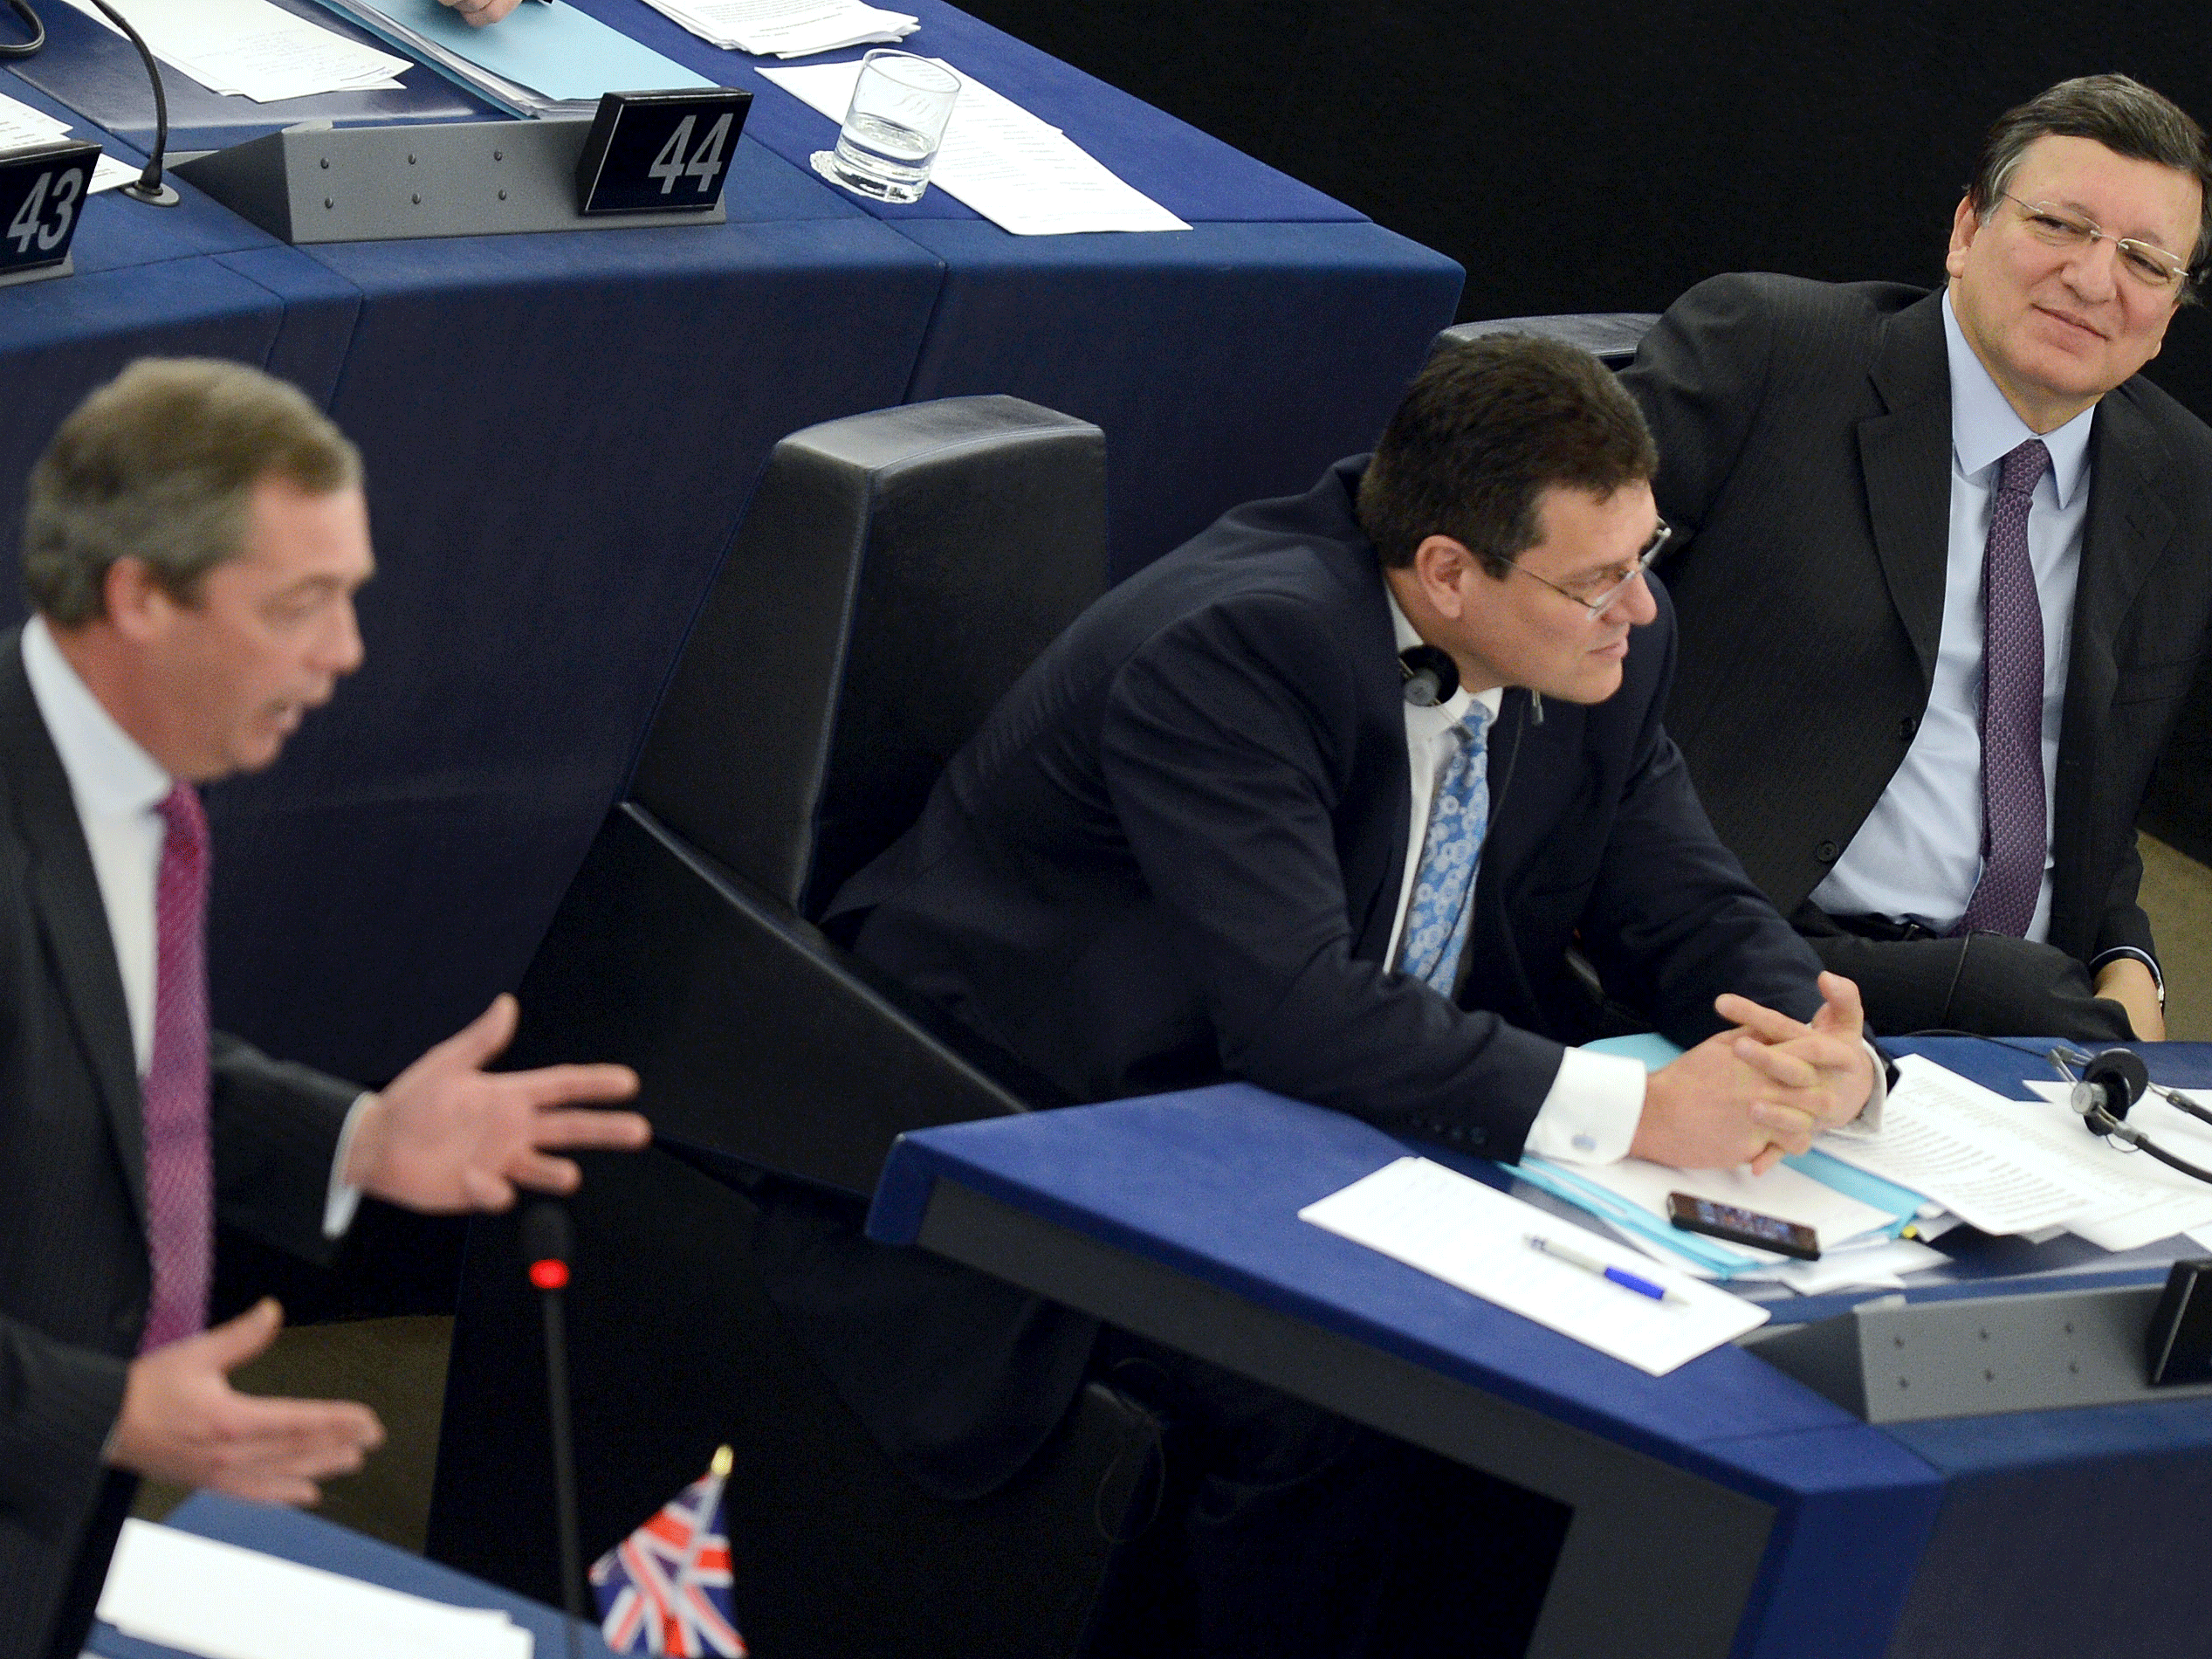 Former EU Commission President Jose Manuel Barroso looks on at Nigel Farage, as he makes a speech at the European Parliament at Strasbourg